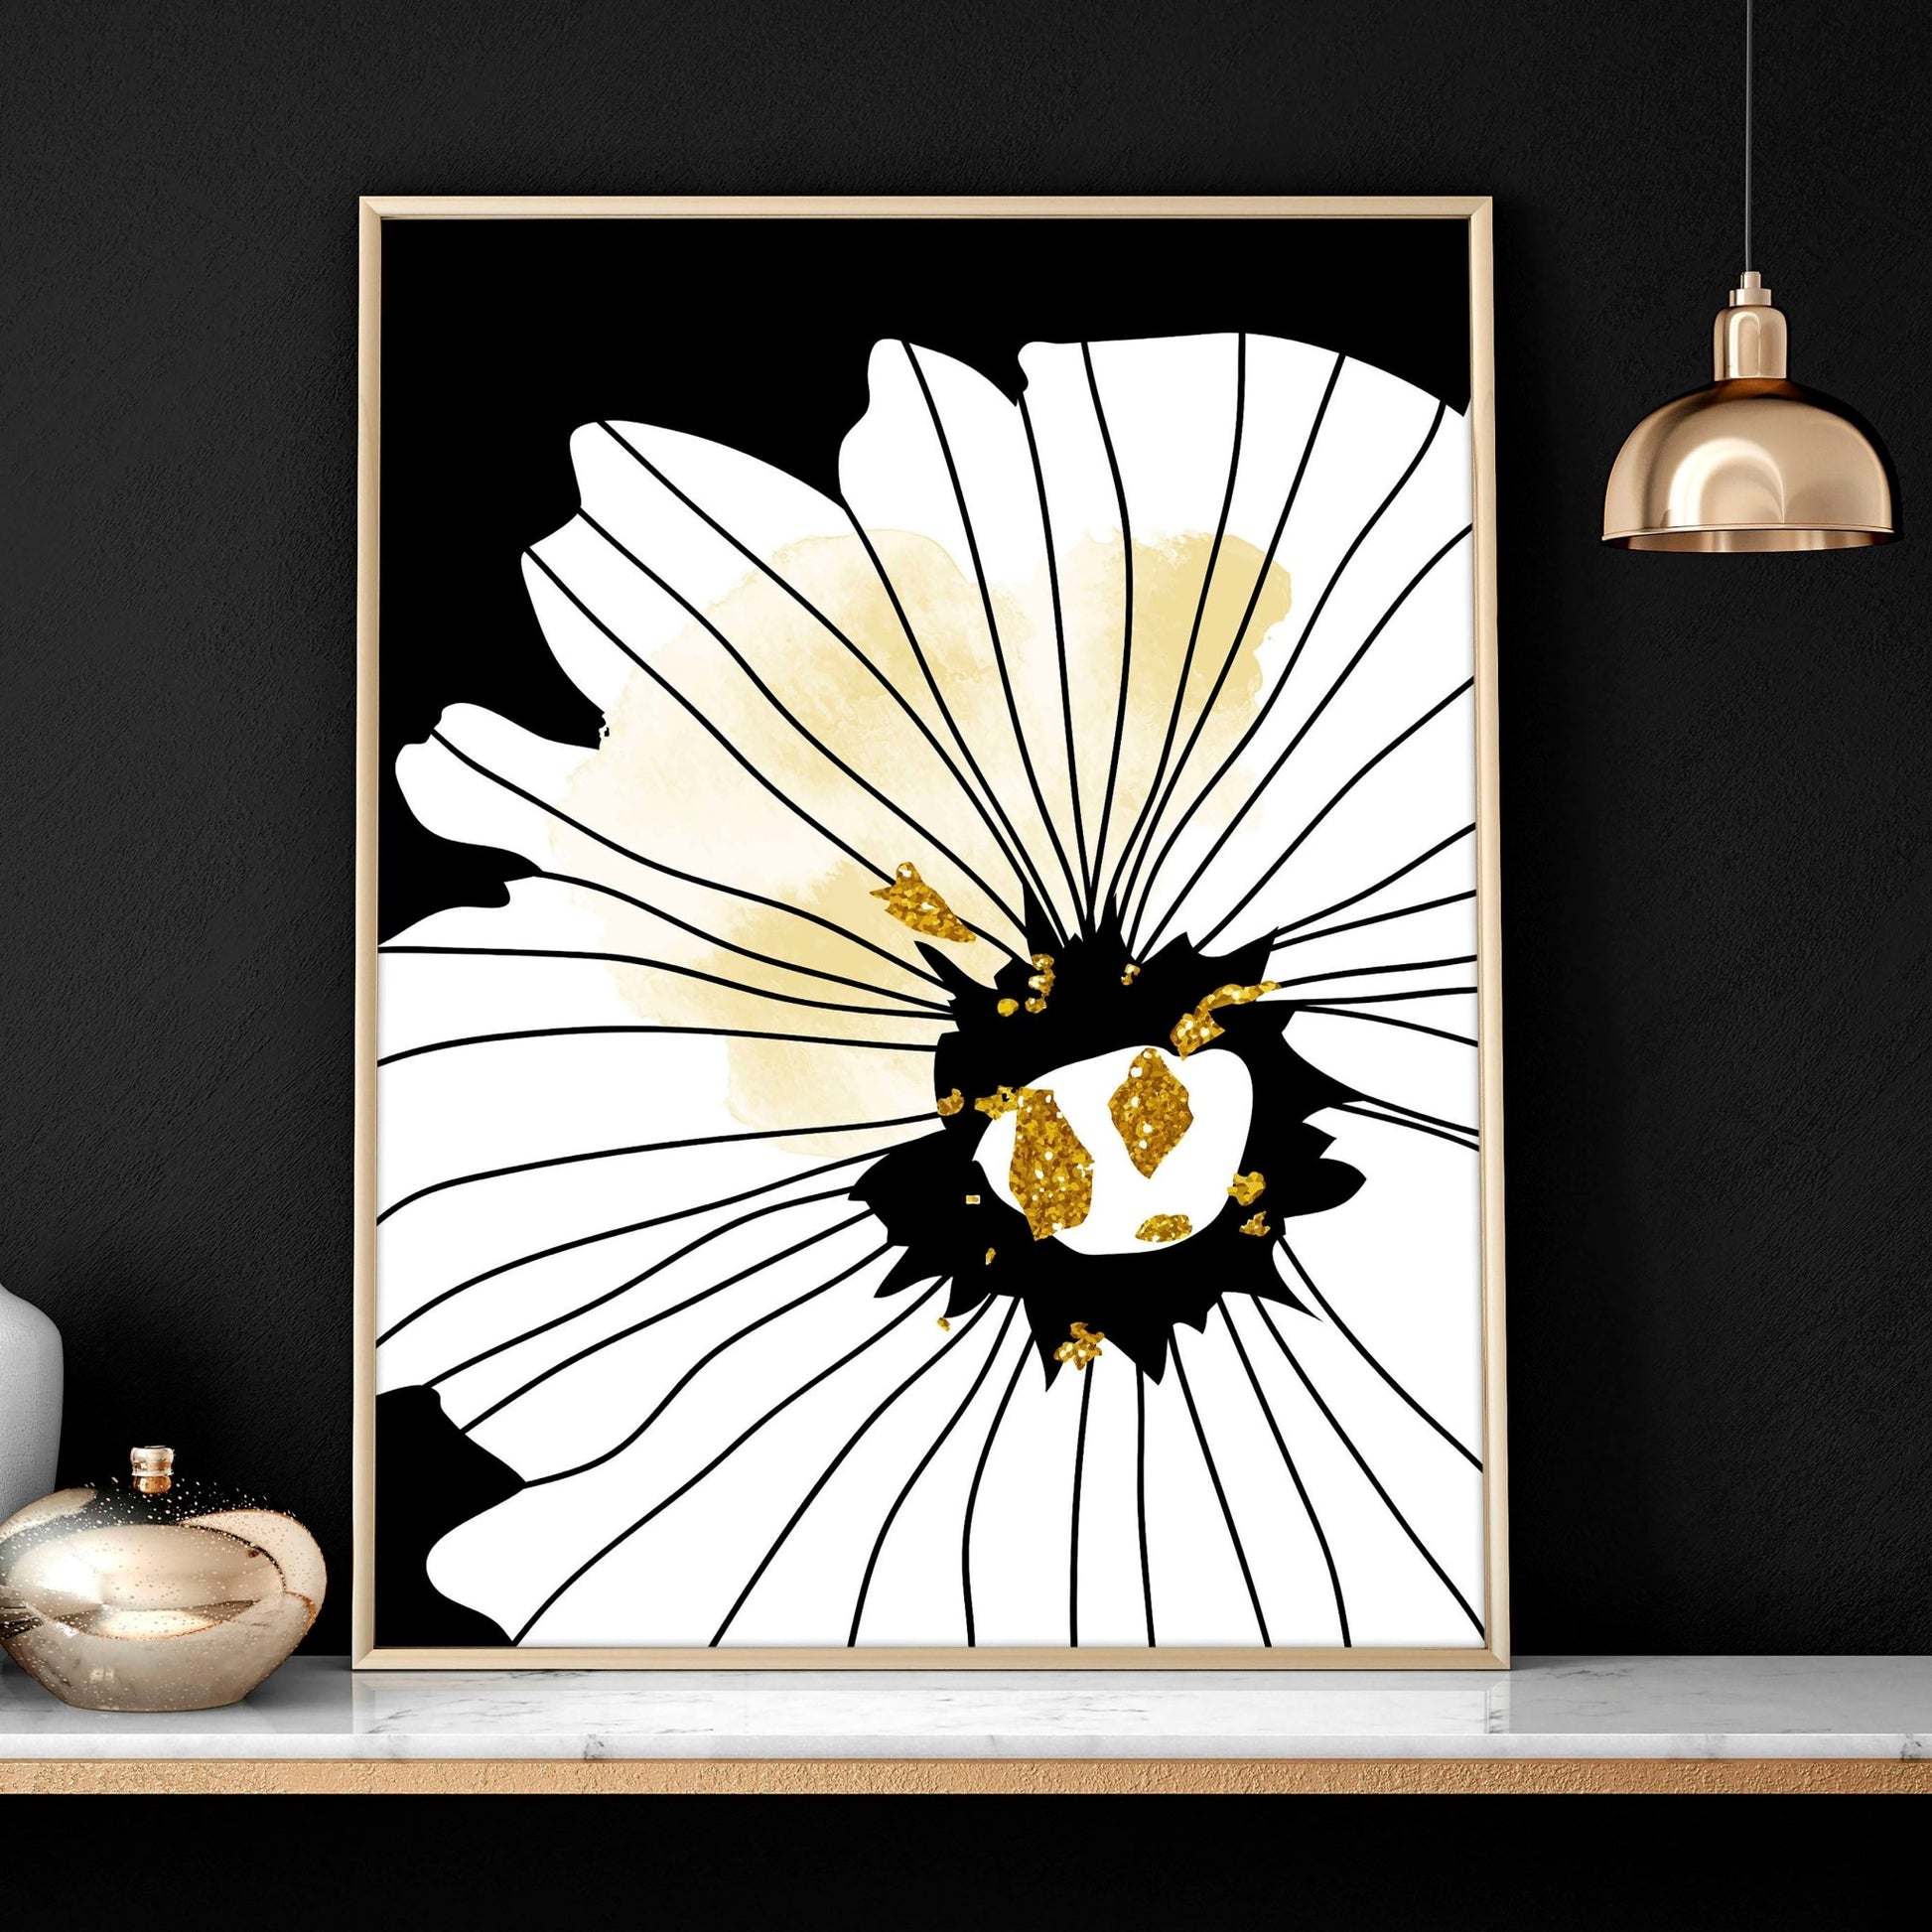 Black and white prints set of 3 | framed wall art prints - About Wall Art